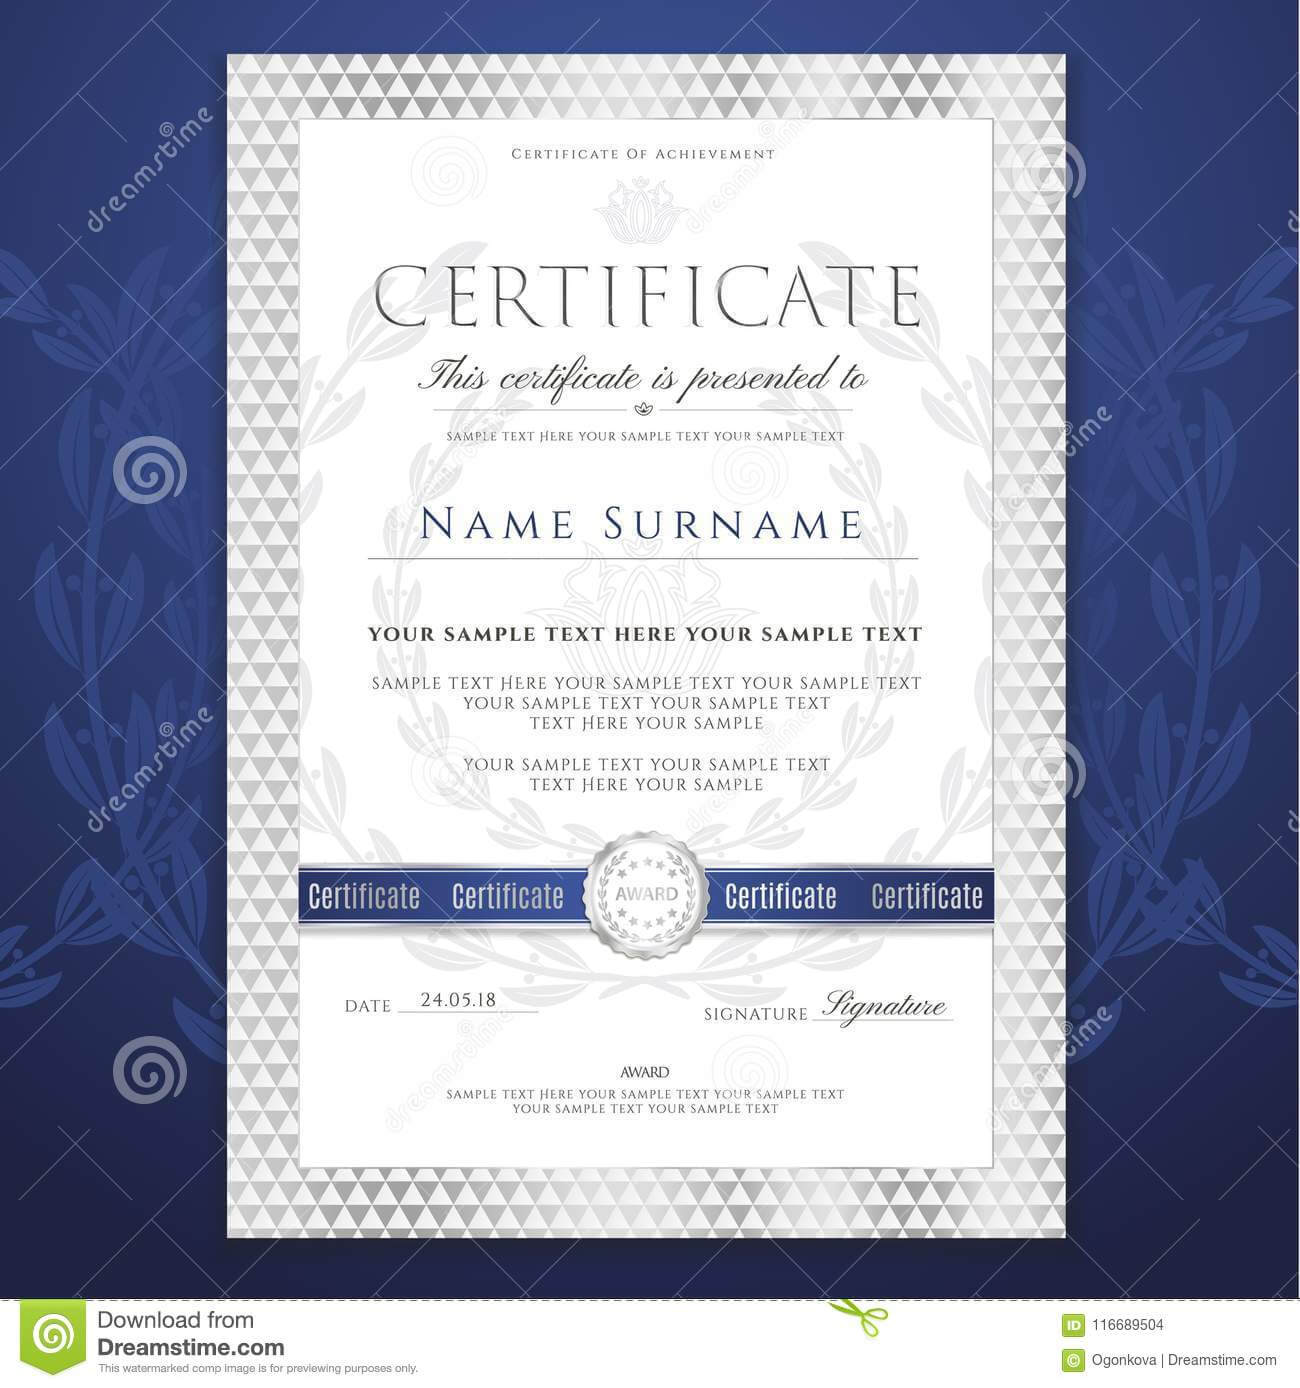 Certificate Template. Printable / Editable Design For Throughout Academic Award Certificate Template